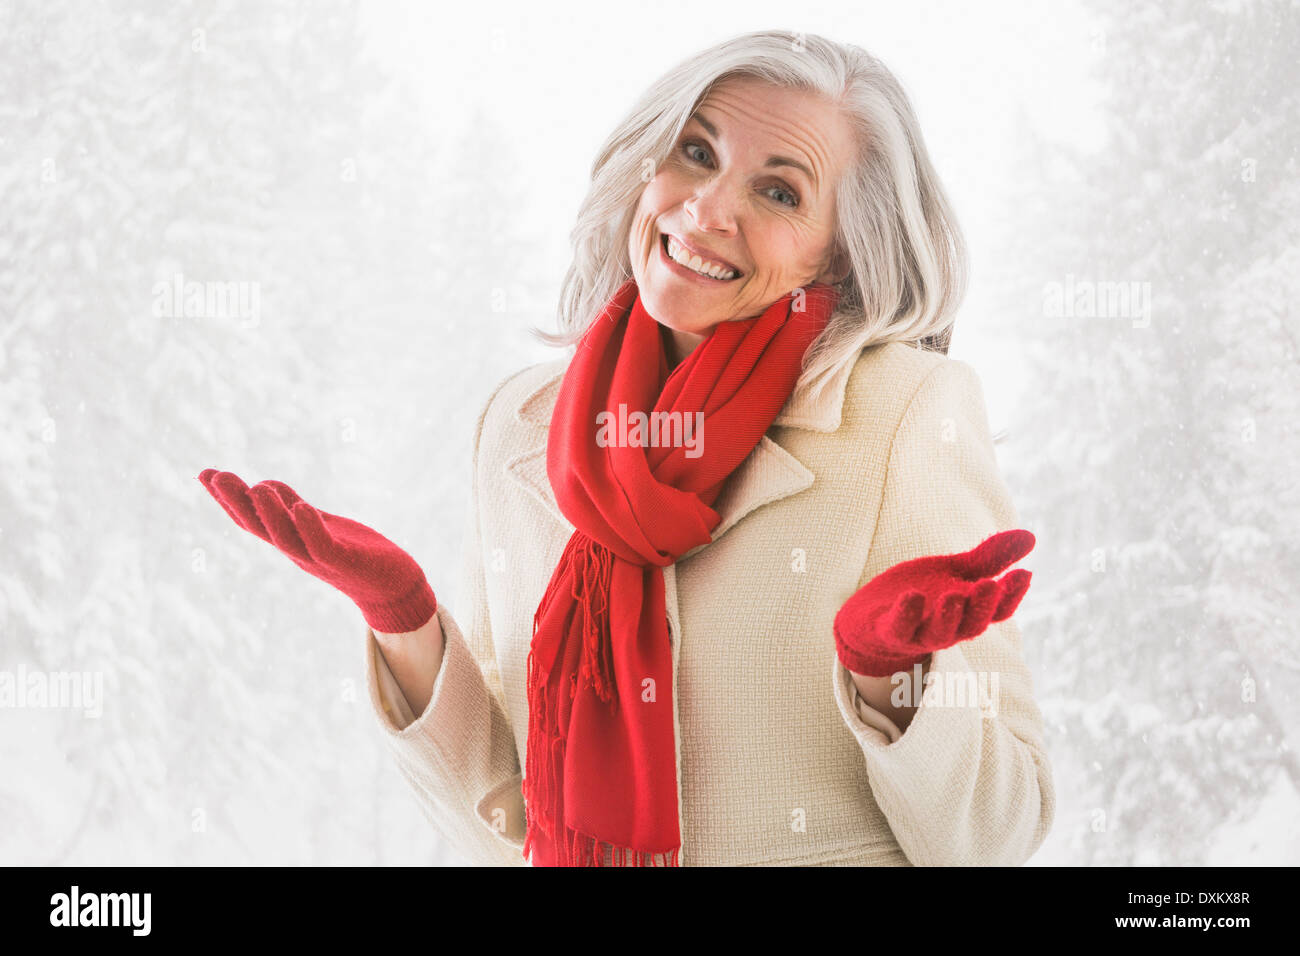 Portrait of shrugging Caucasian woman in warm clothing Stock Photo